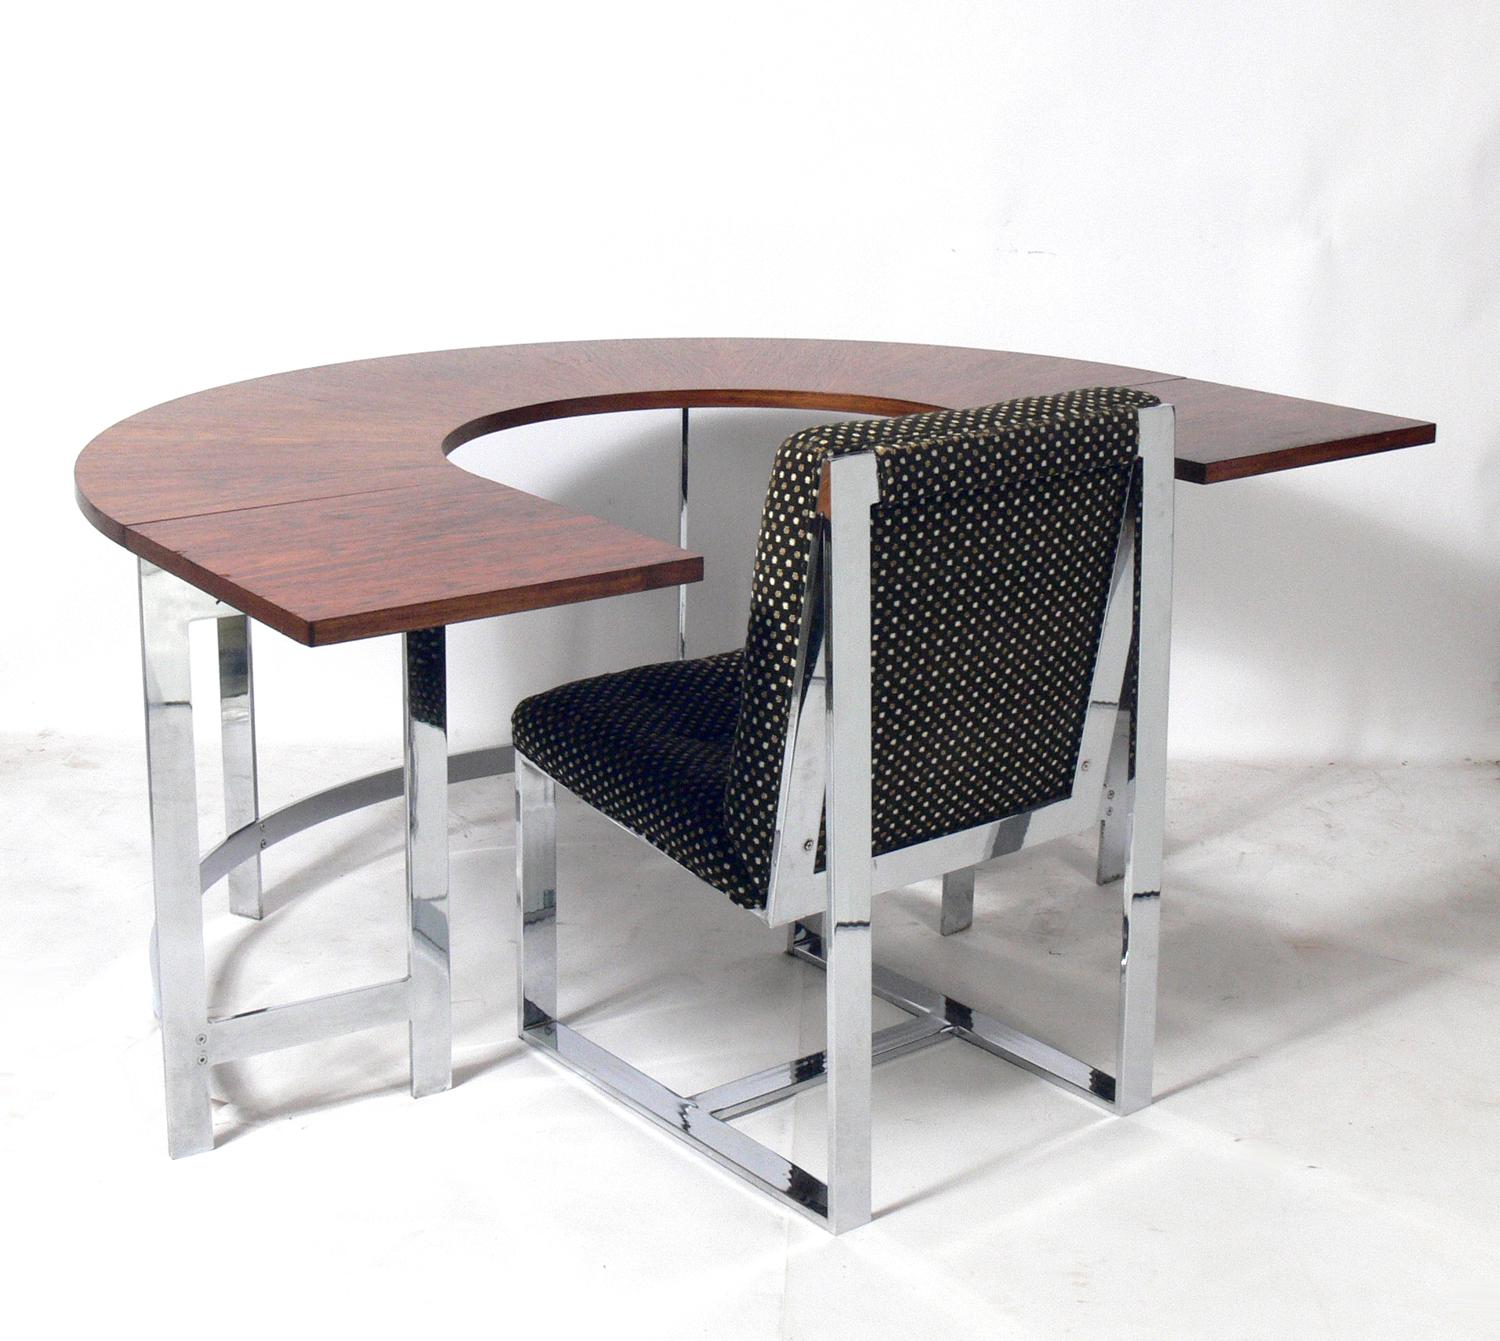 Rosewood and chrome arc desk and chair, circa 1960s. Very heavy and well made. The chair is currently being reupholstered and can be completed in your fabric at no additional charge. Simply send us 2 yards of your fabric after purchase. With the